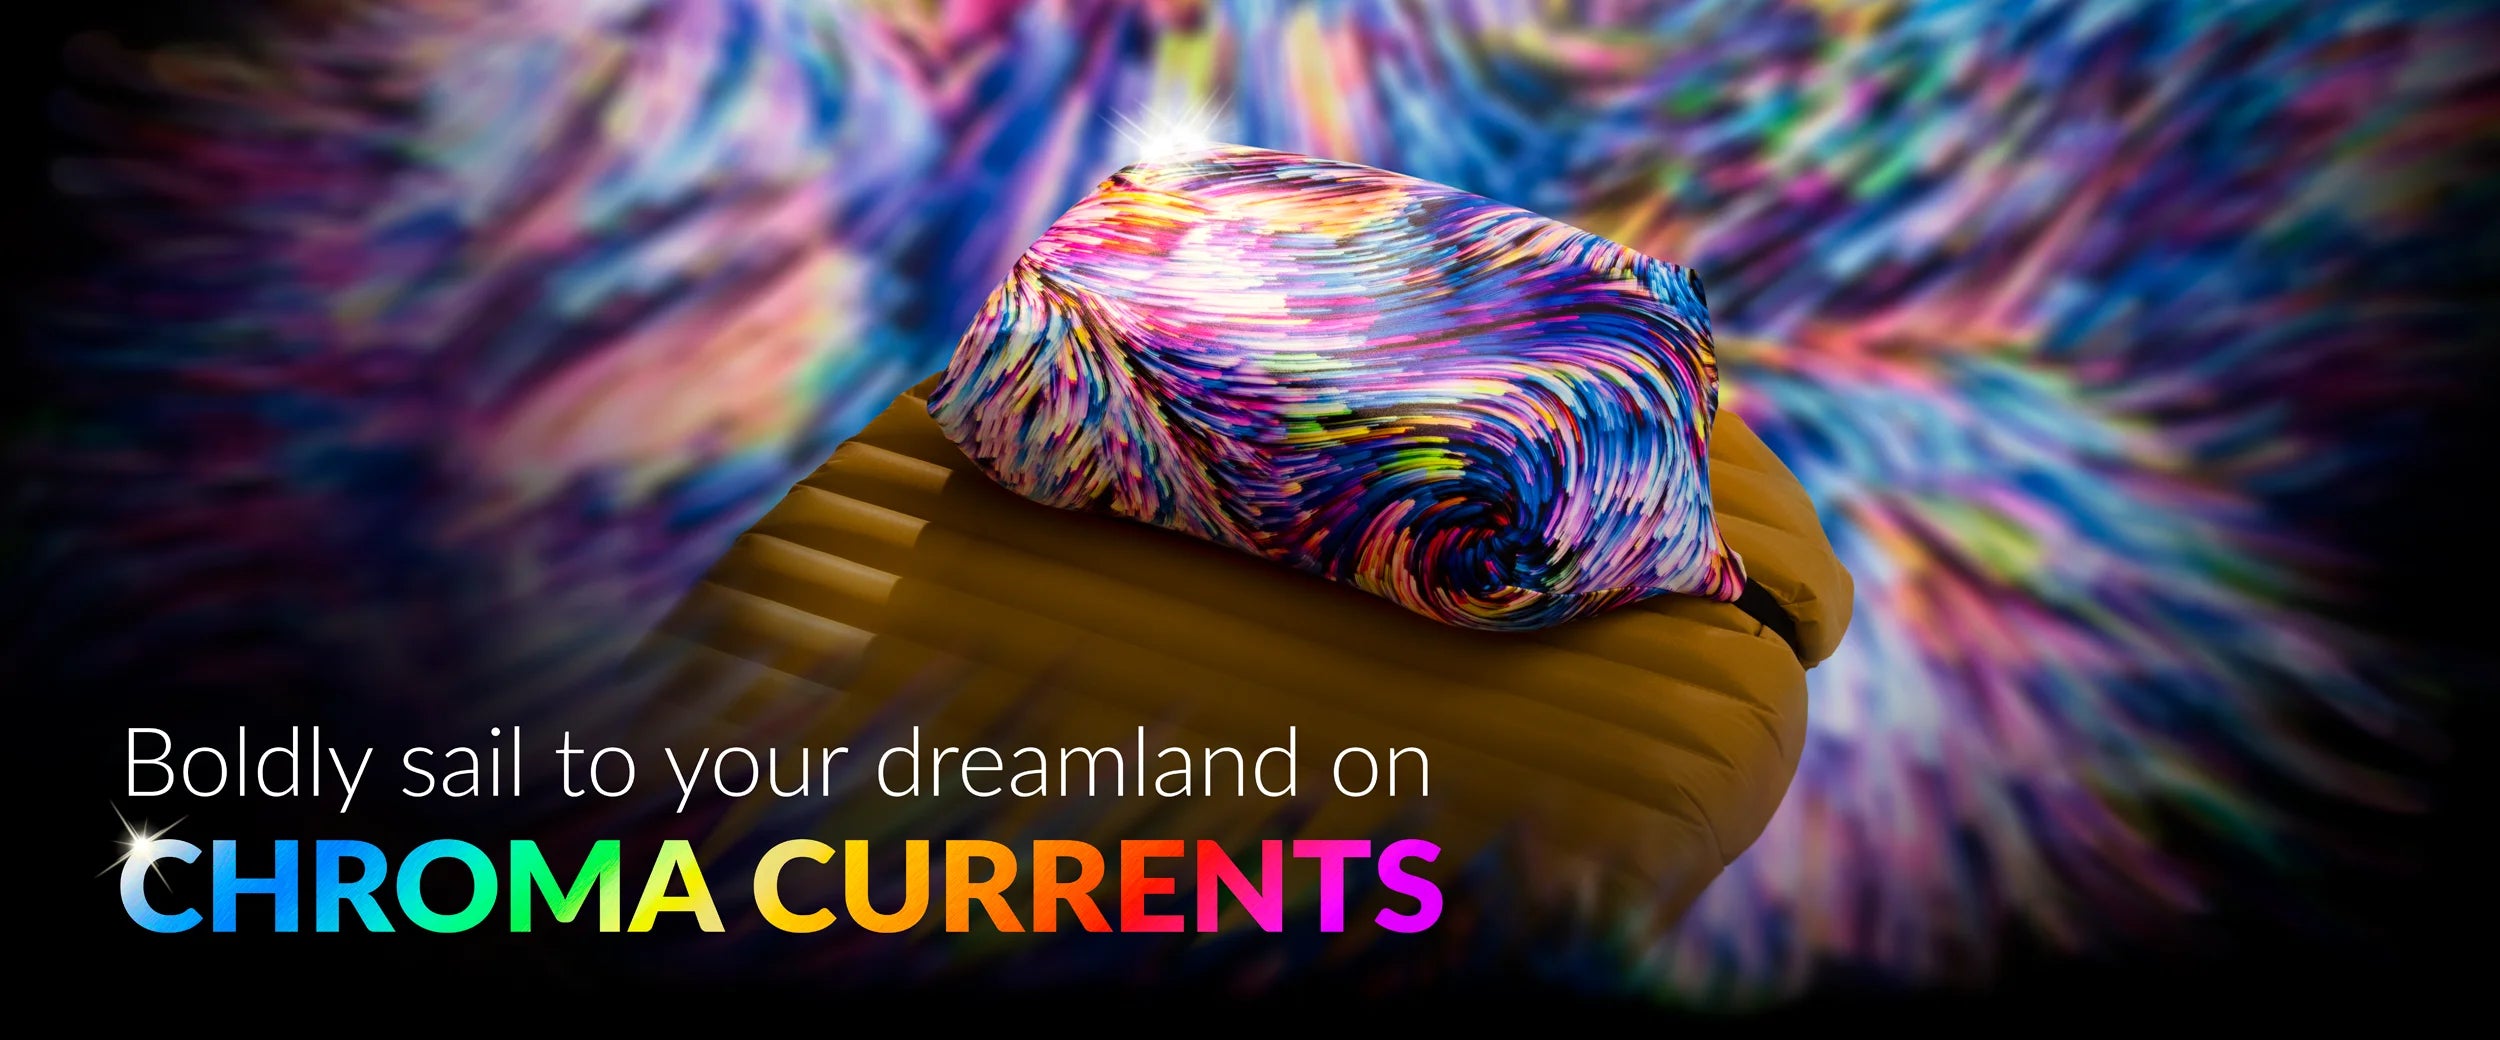 Pillow Strap Camping Pillow Case - Boldly sail to your dreamland on Chroma Currents